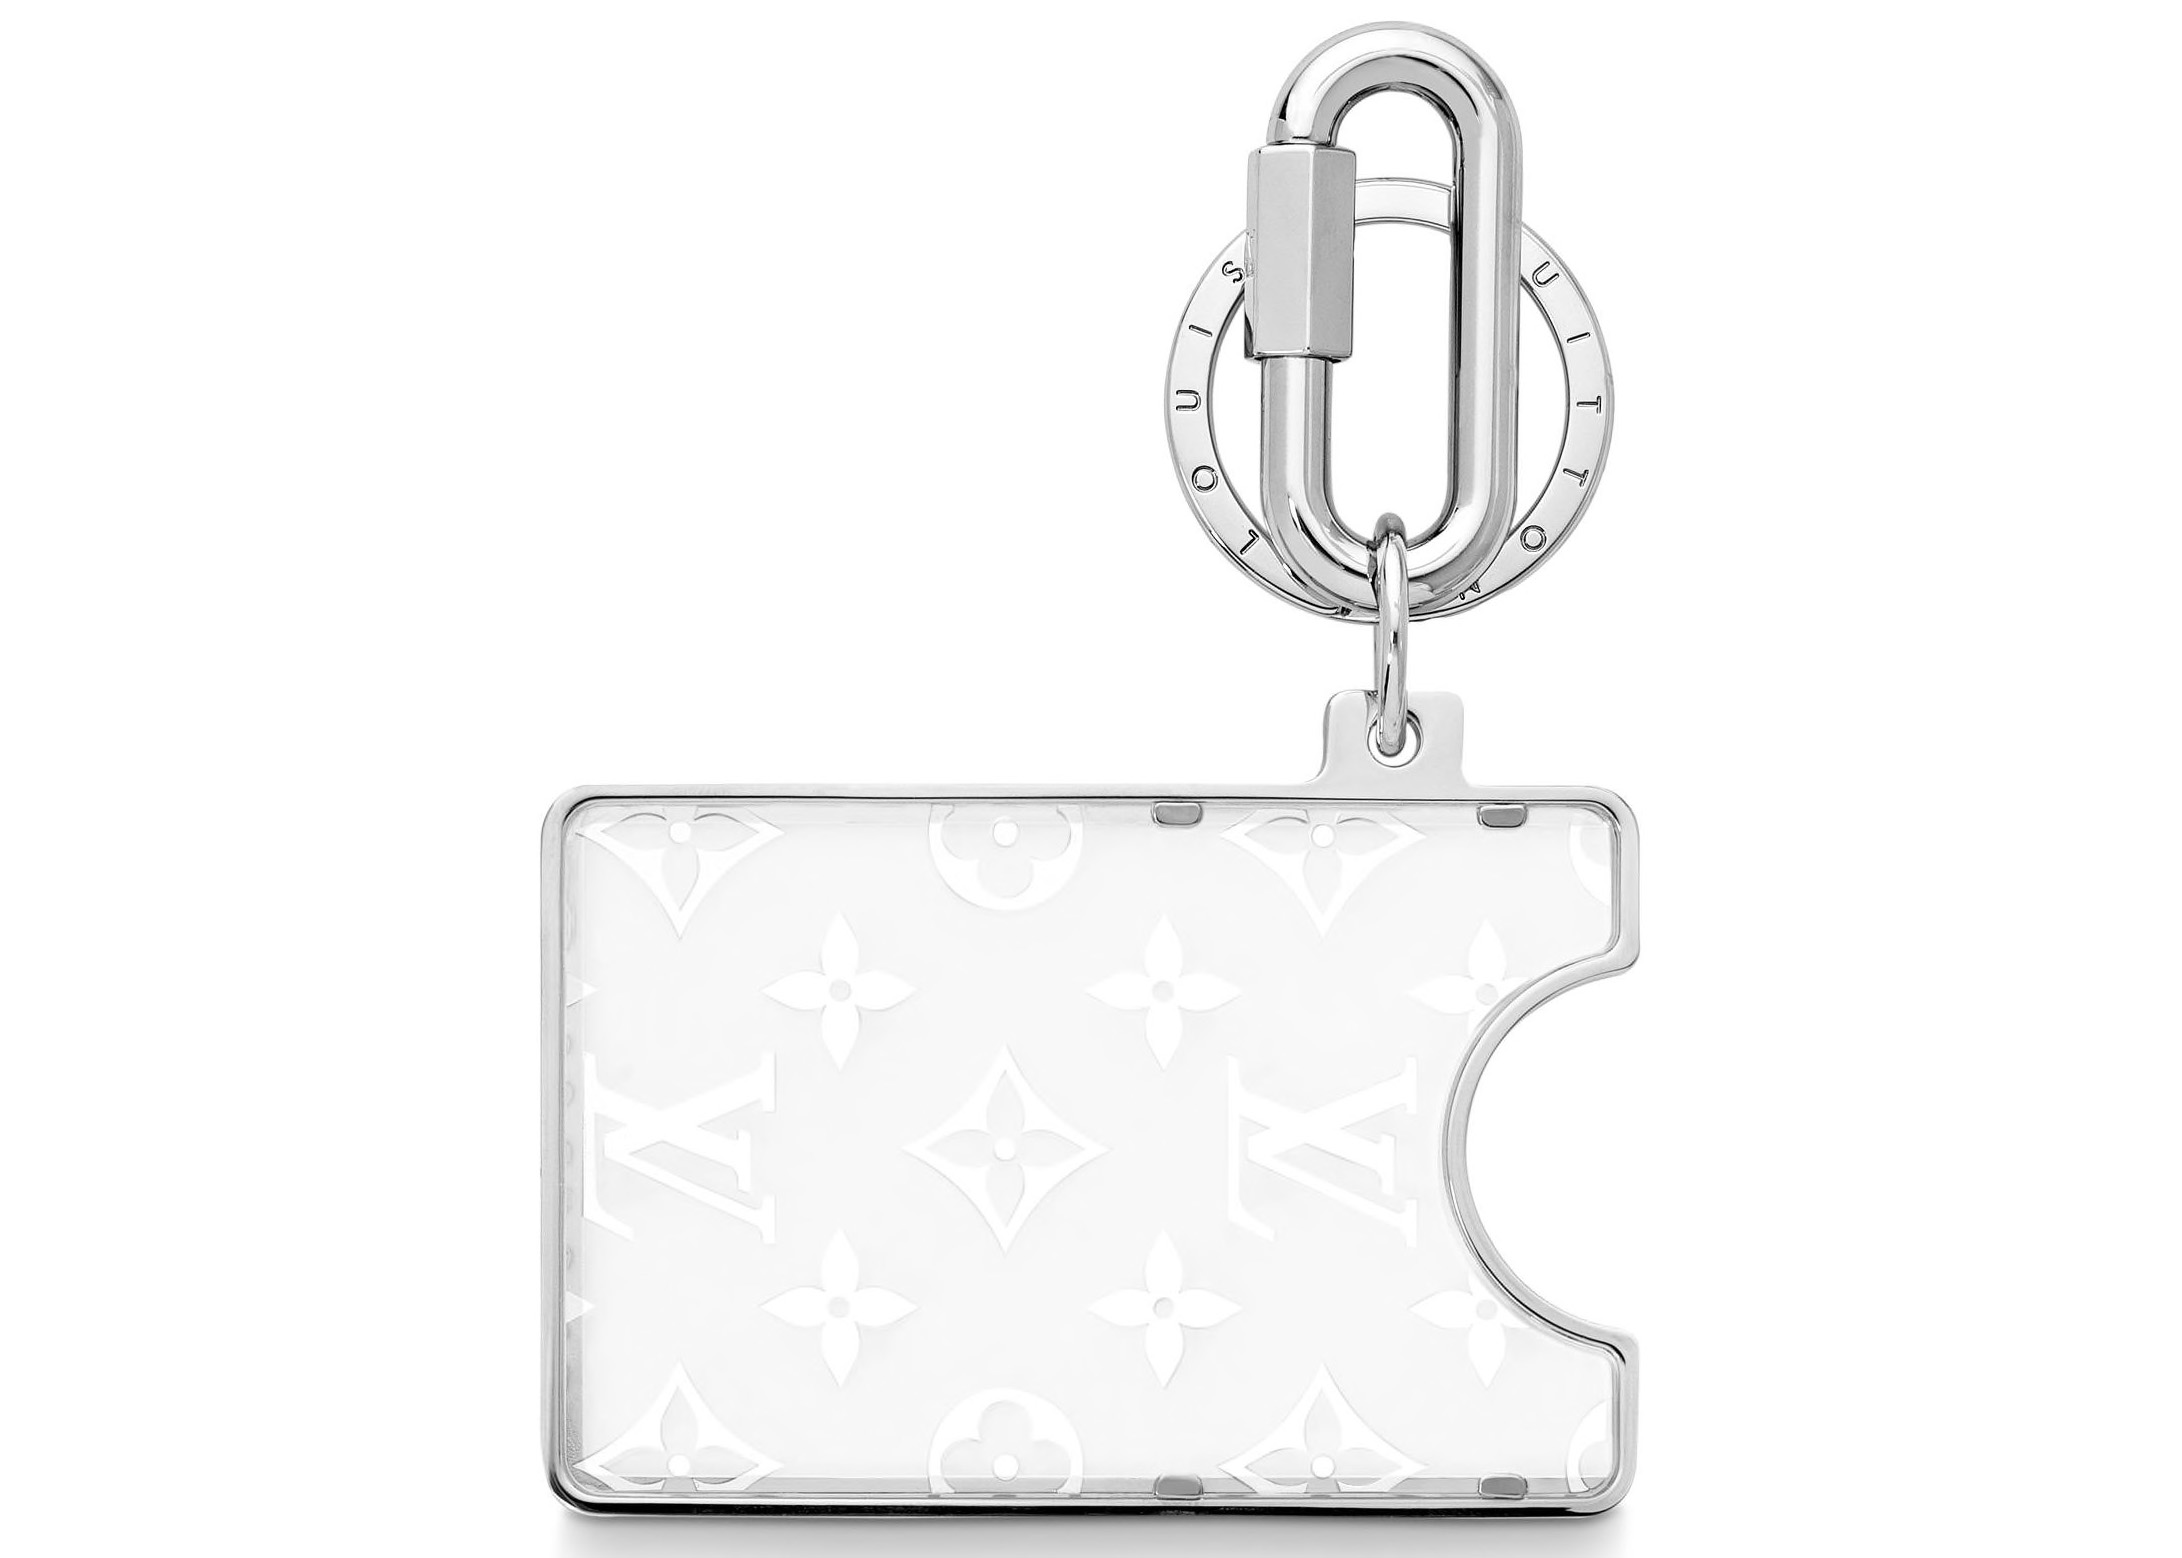 Louis Vuitton 2021 Cruise Lv Prism Id Holder Bag Charm And Key Holder  (M69299, M69299)